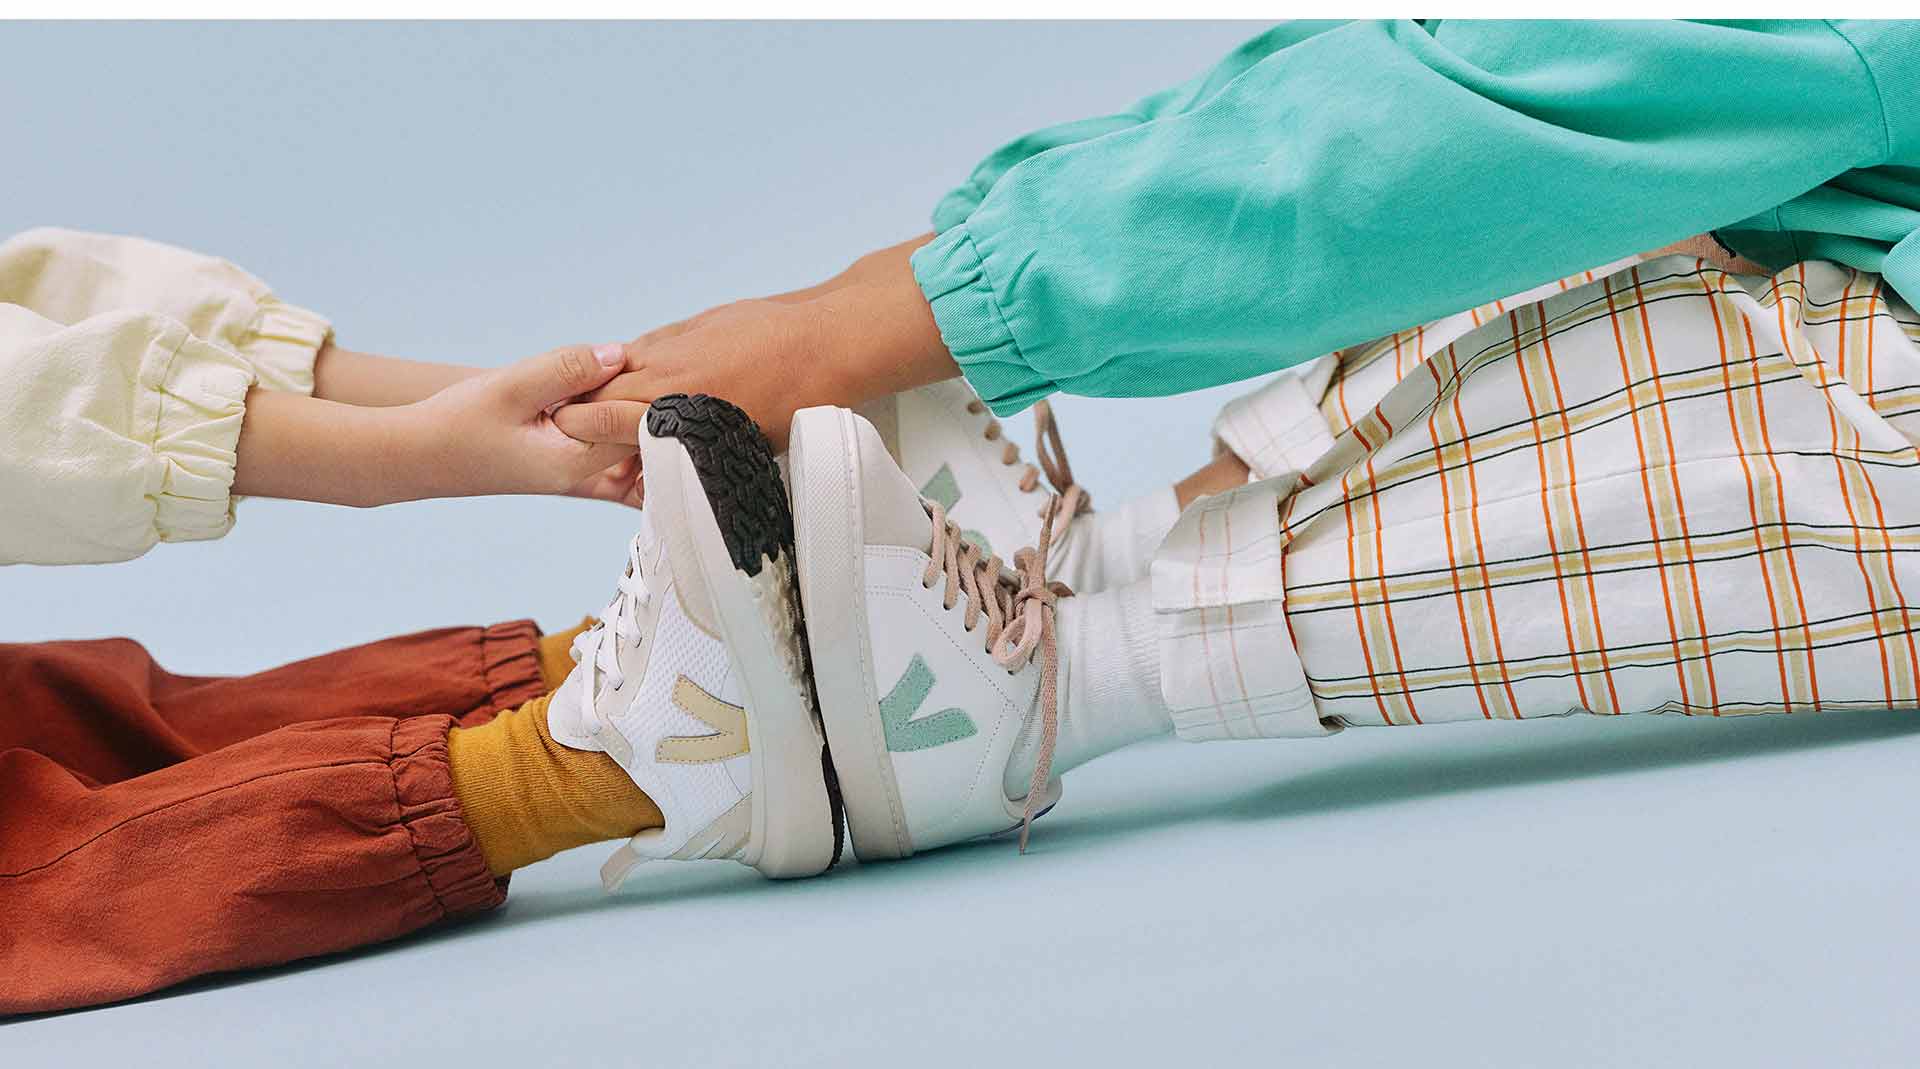 Focus on the hands of two children wearing Veja trainers